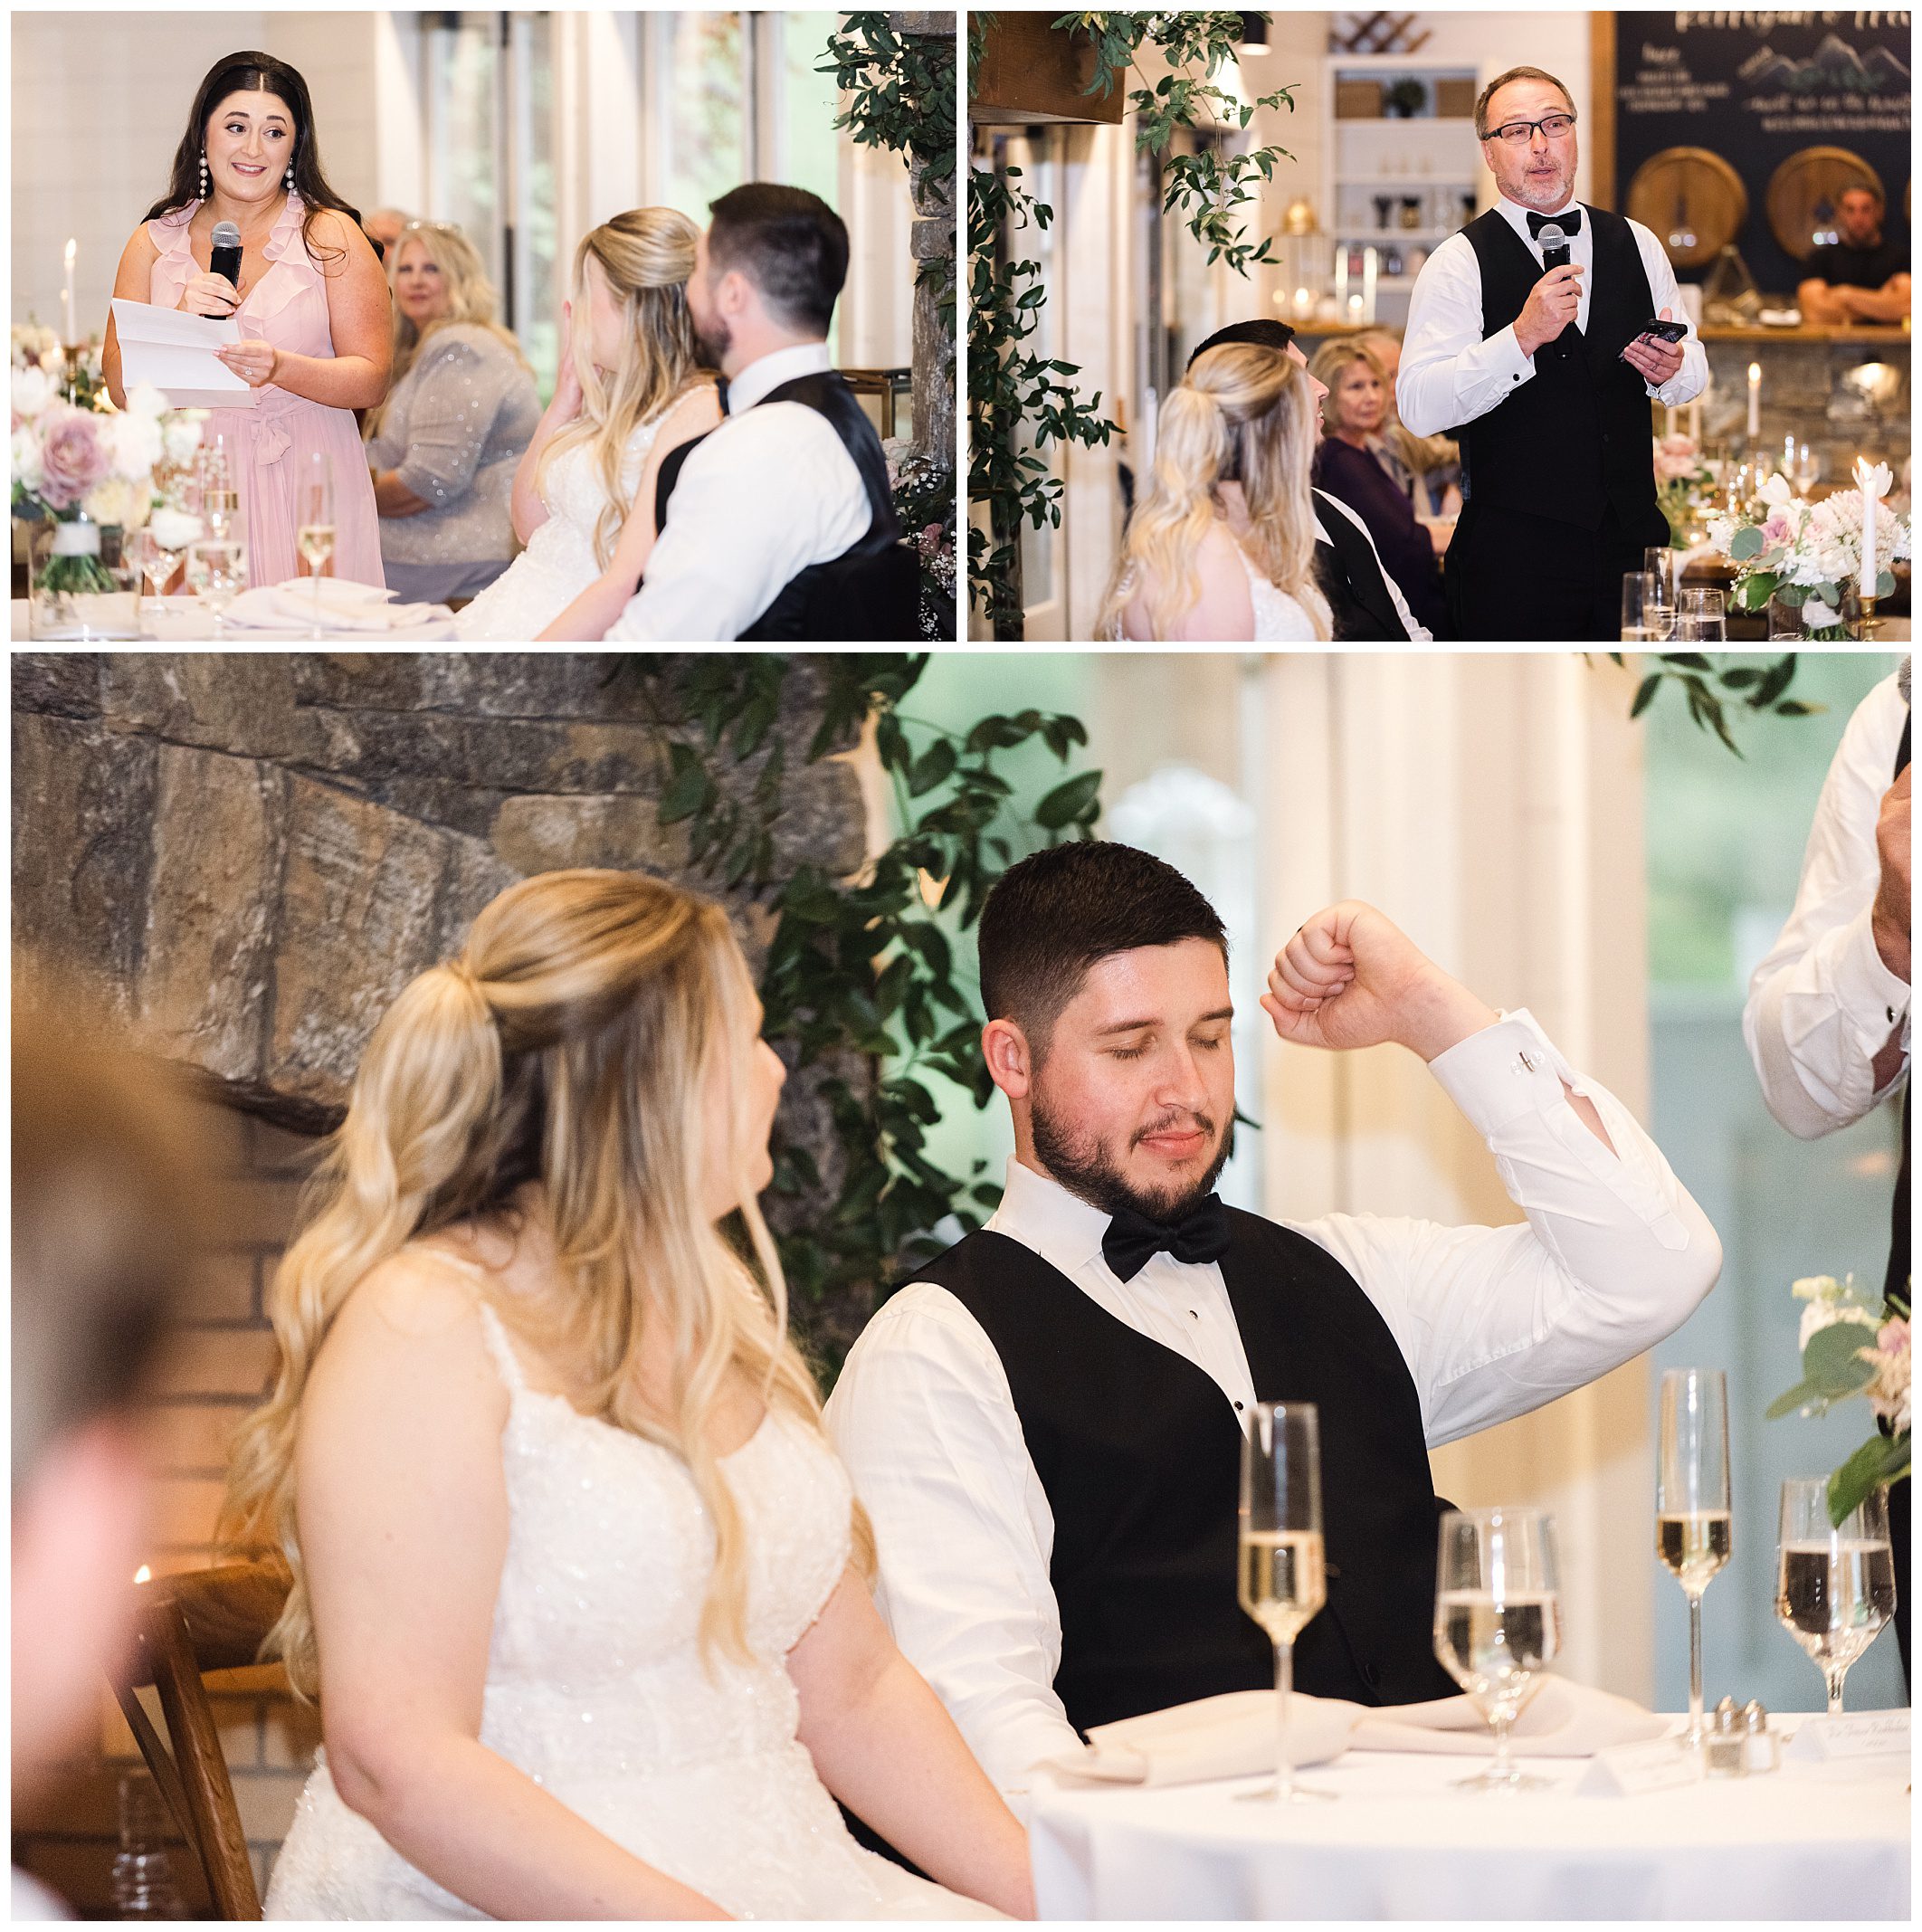 Collage of mountain wedding reception speeches at Chestnut Ridge: top left, a woman speaking with a microphone; top right, a man giving a speech; bottom, a bride and groom listening attentively.